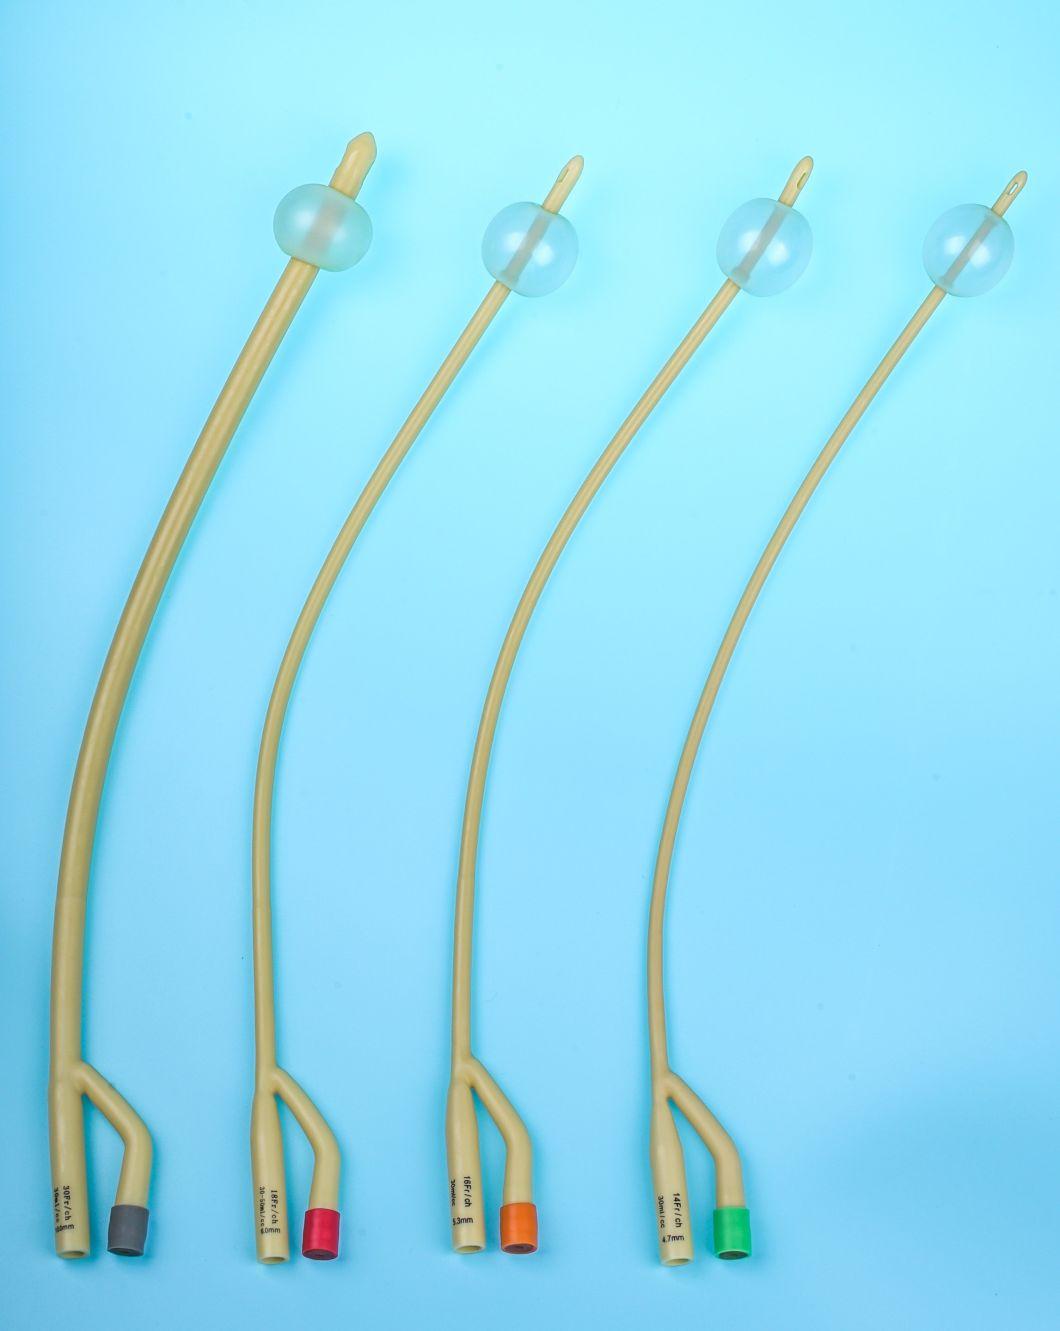 Medical Disposable Latex PVC Urethral Catheter Foley Catheter Urethral Probe with CE Certificate